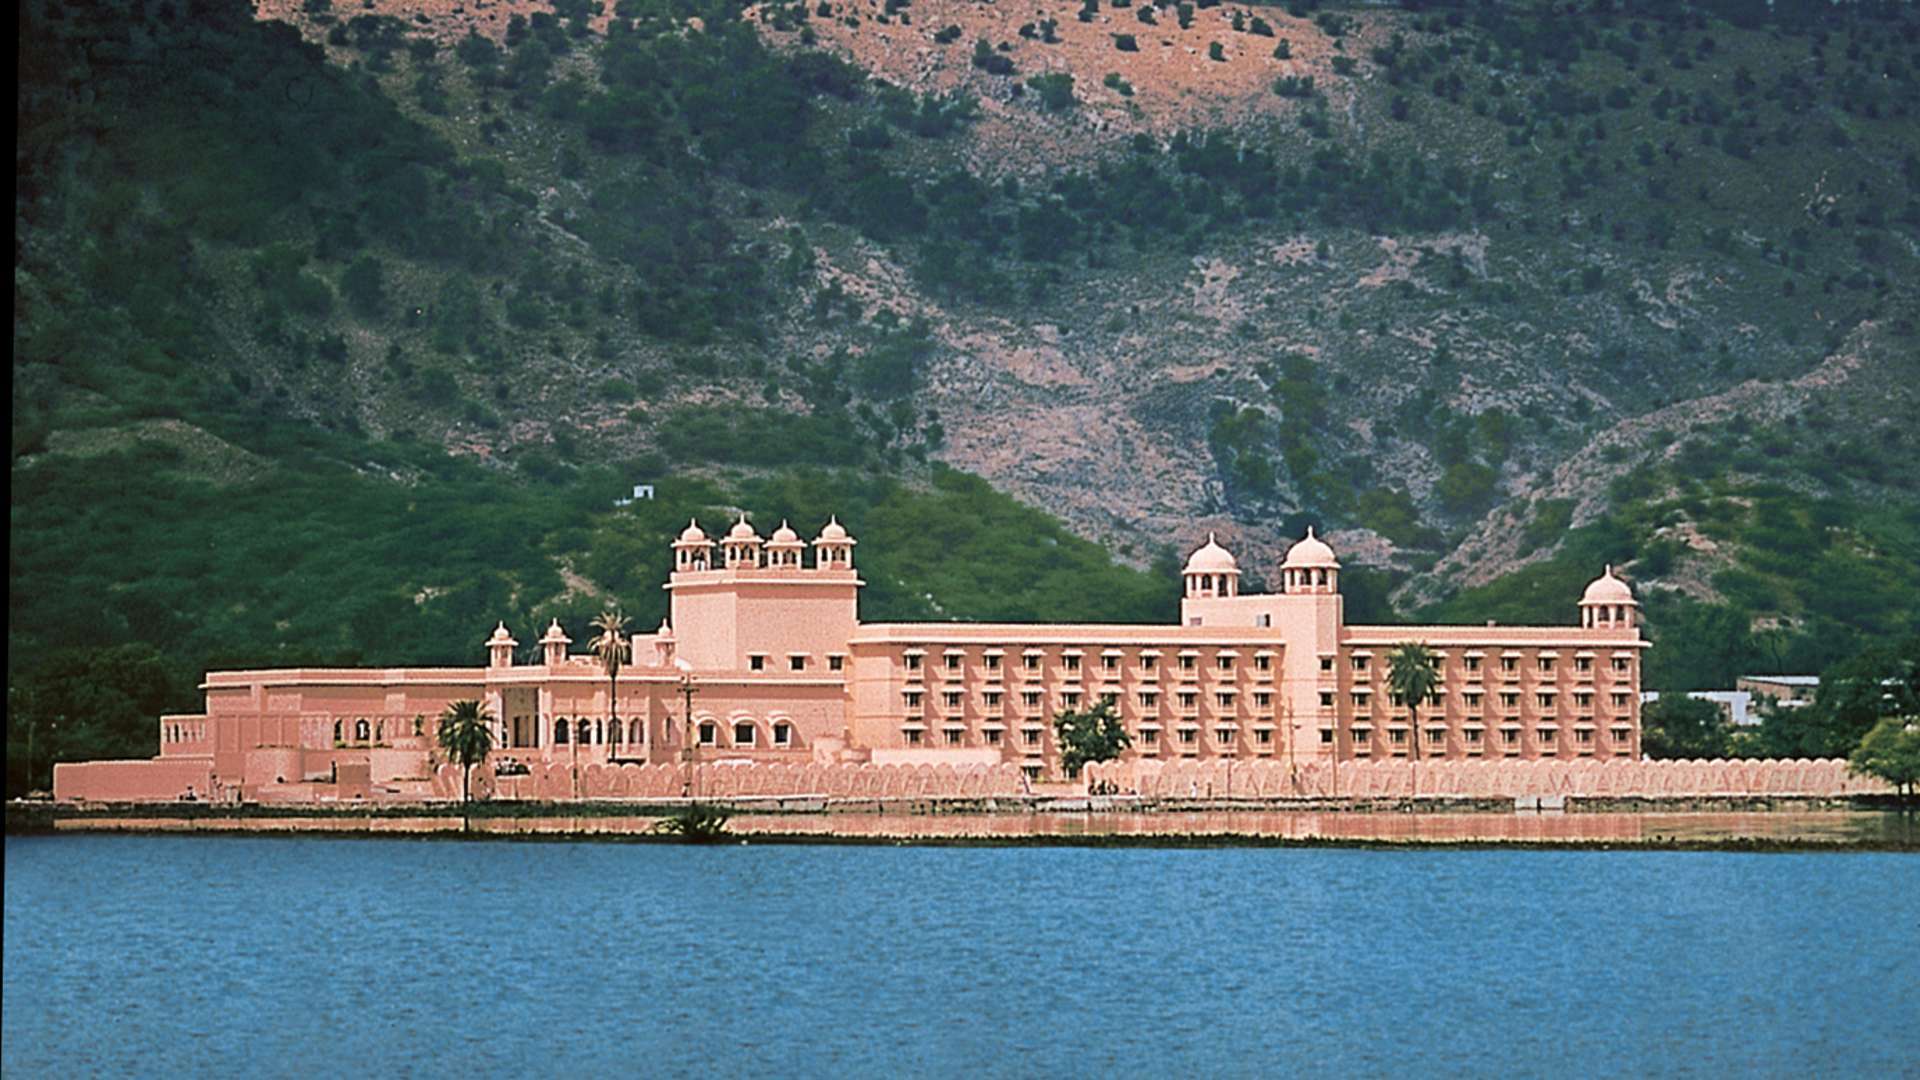 Hotels Near By Amber Fort in Jaipur